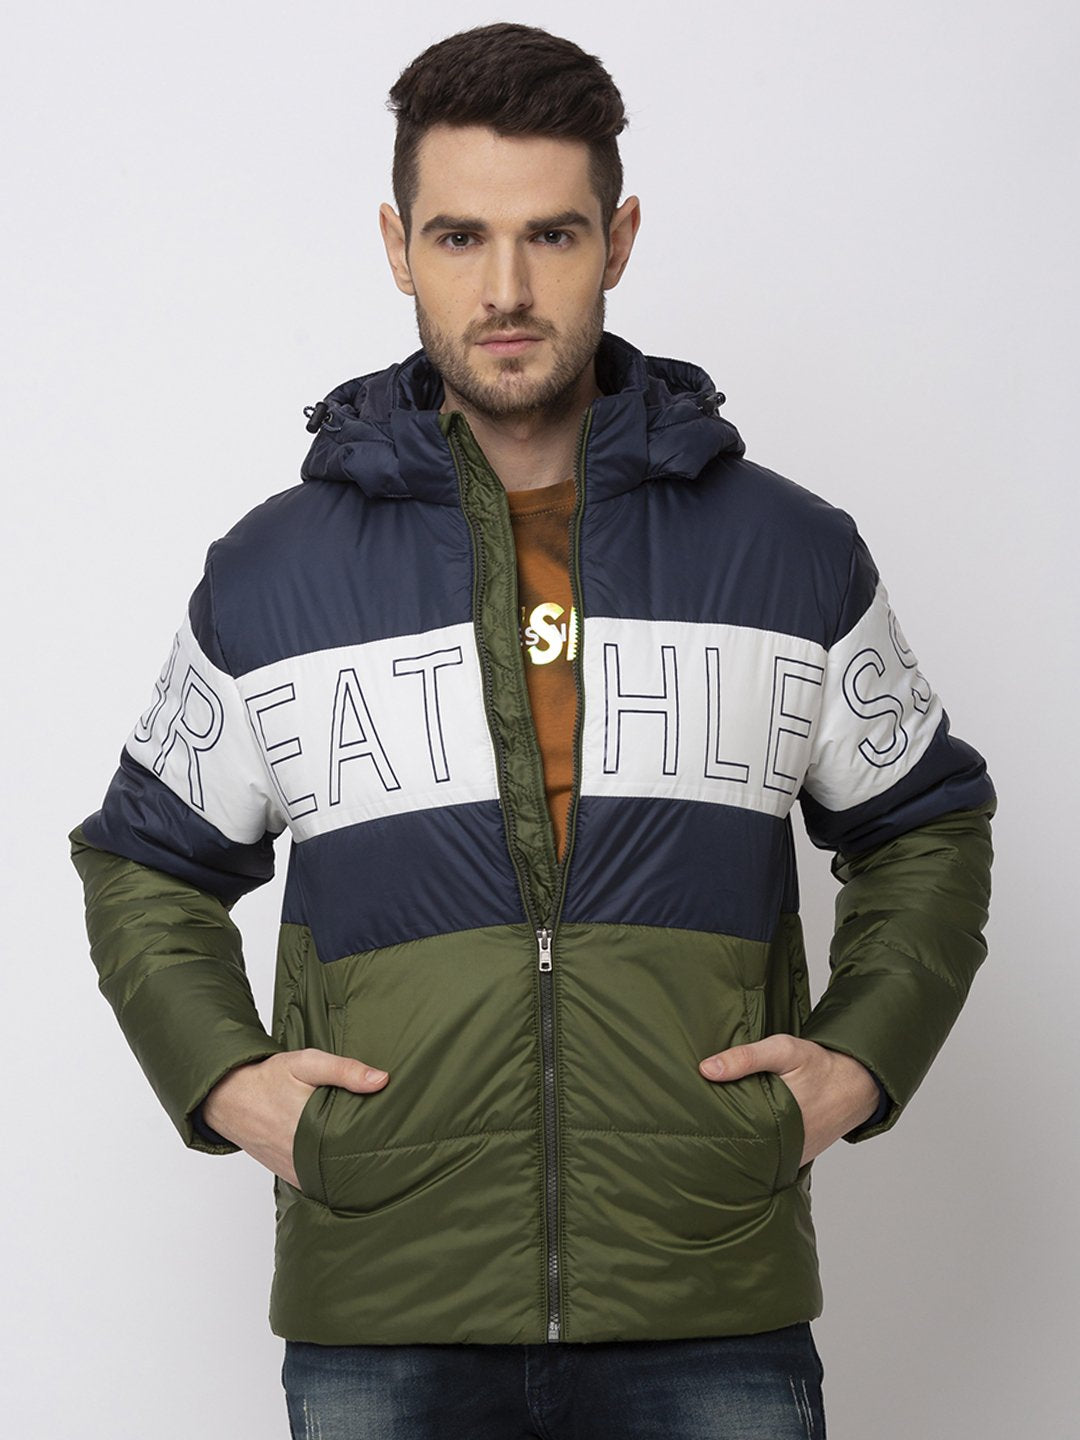 quilted jacket for men